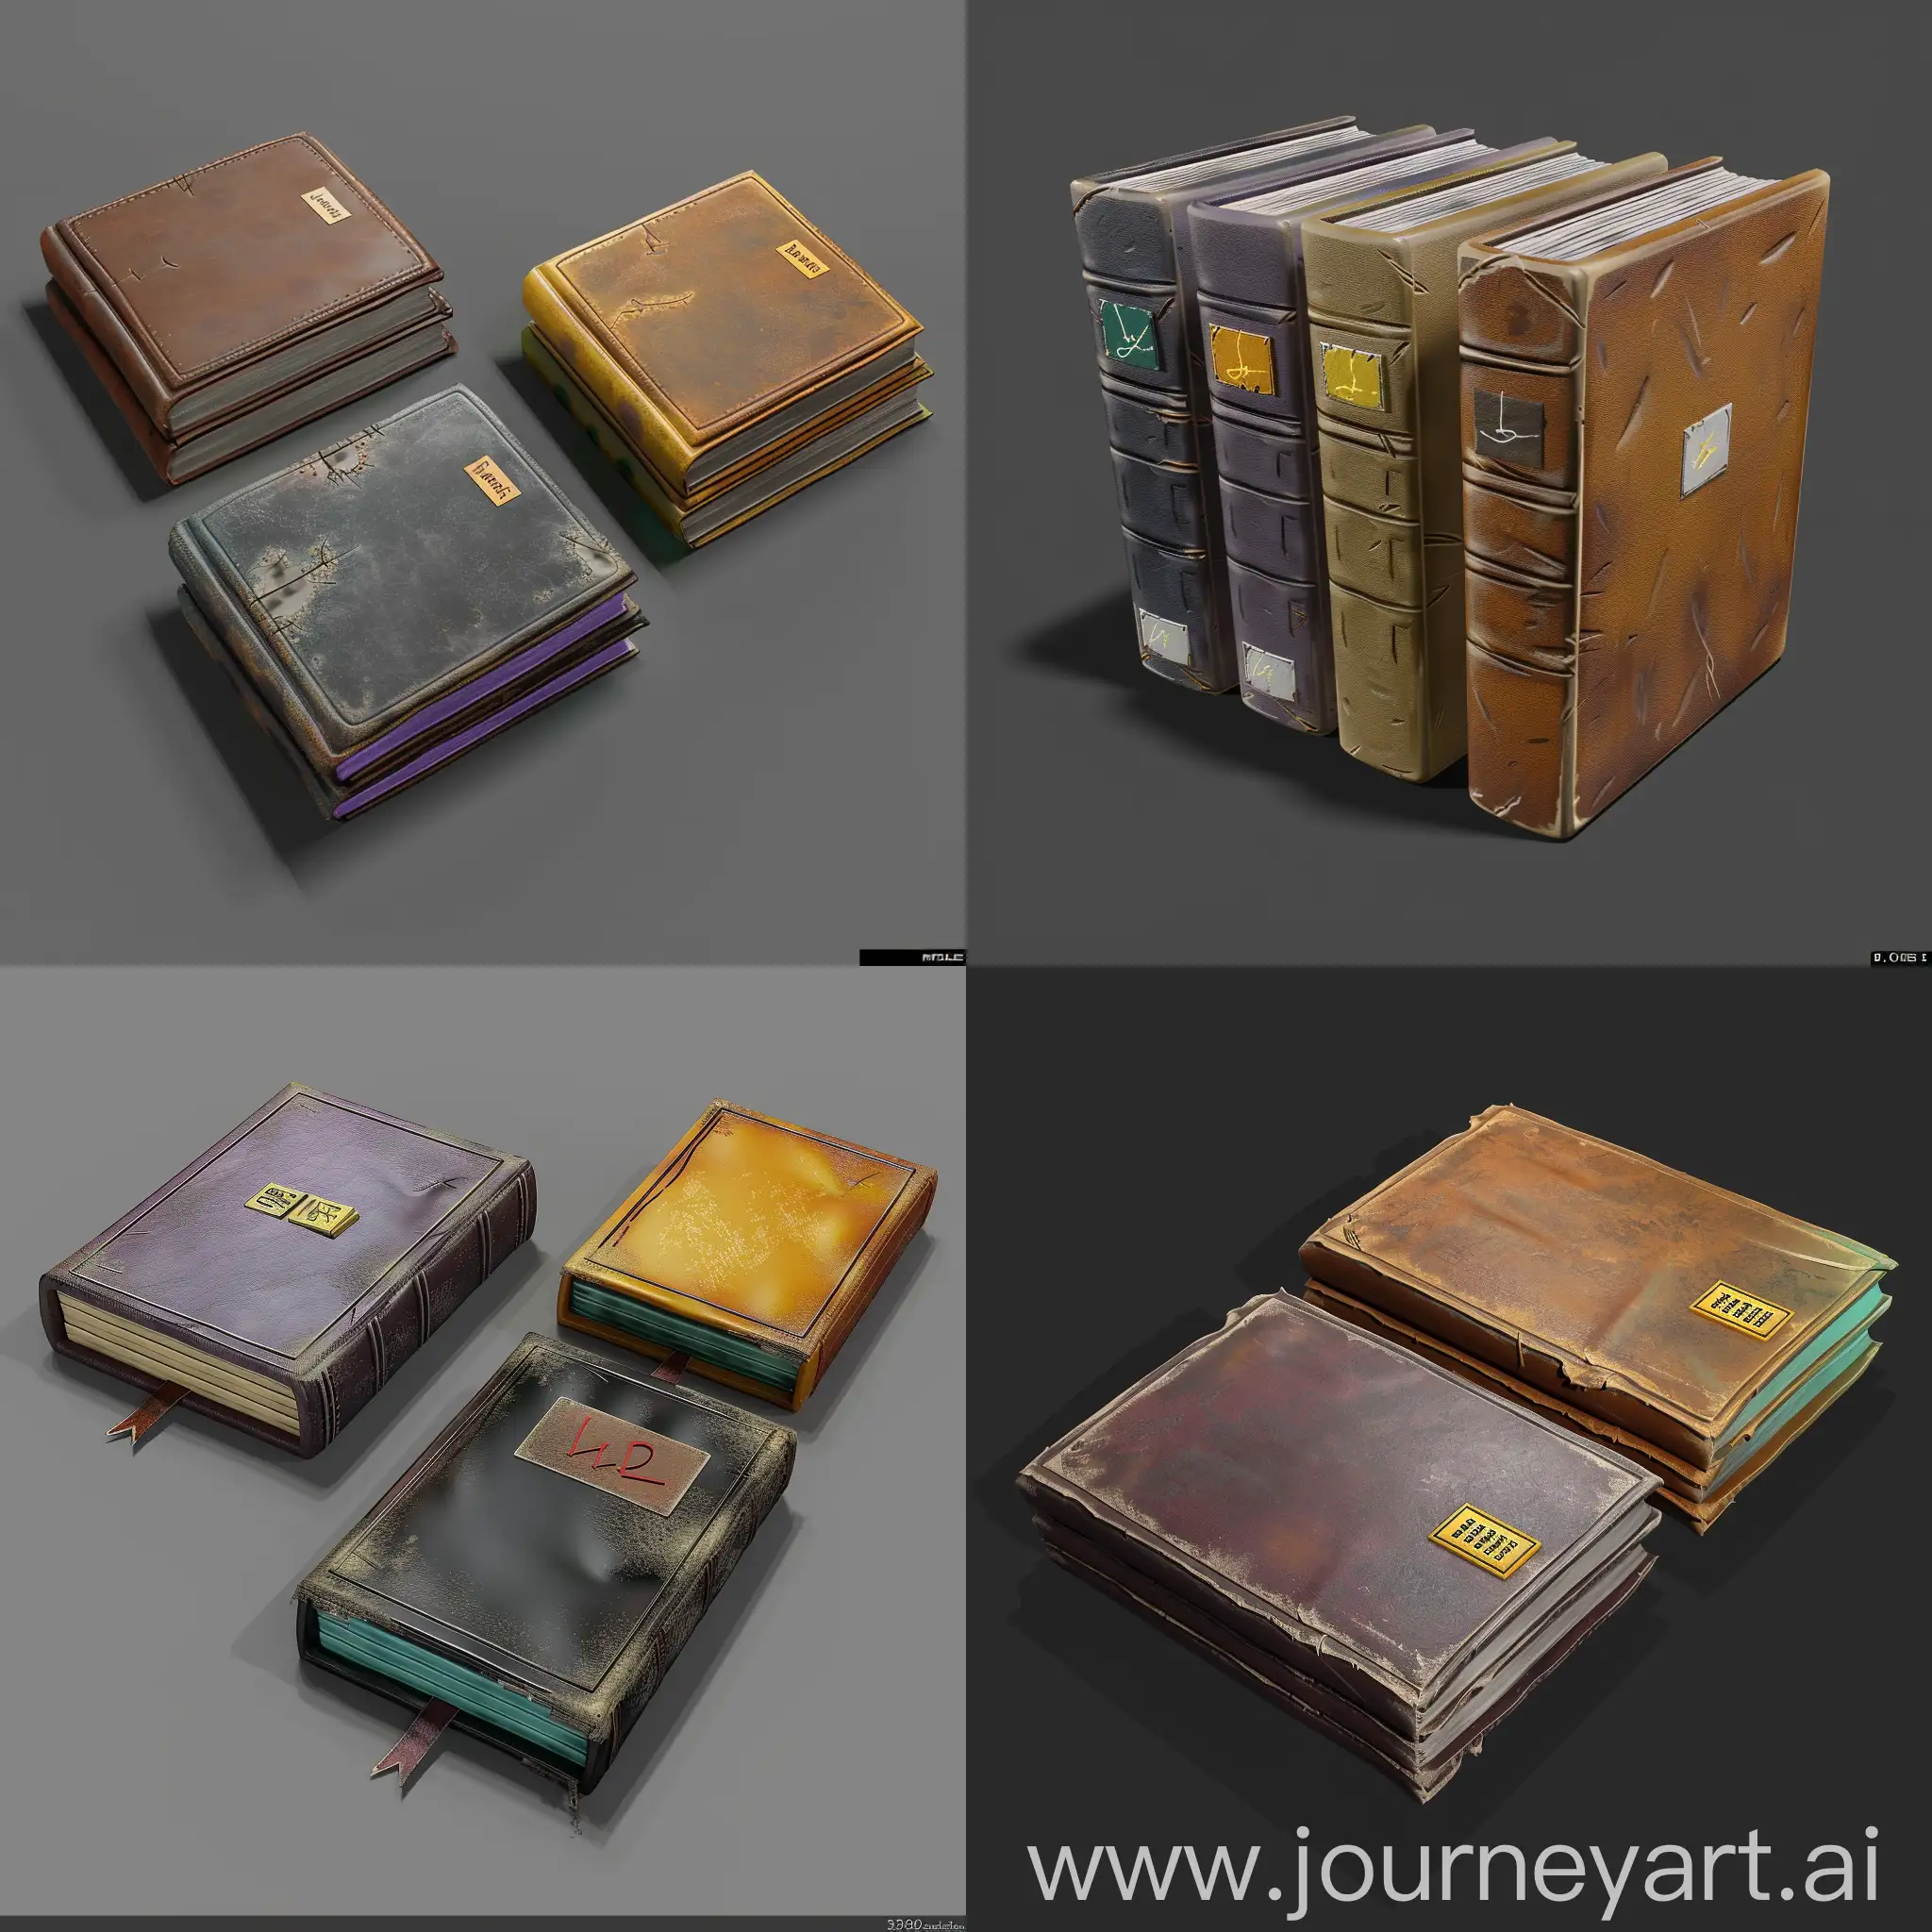 https://imgbly.com/ib/NhVu9noHmK.jpg realistic wornclean very thin books without text in style of realistic 3d blender game asset, leather cover, realistic style